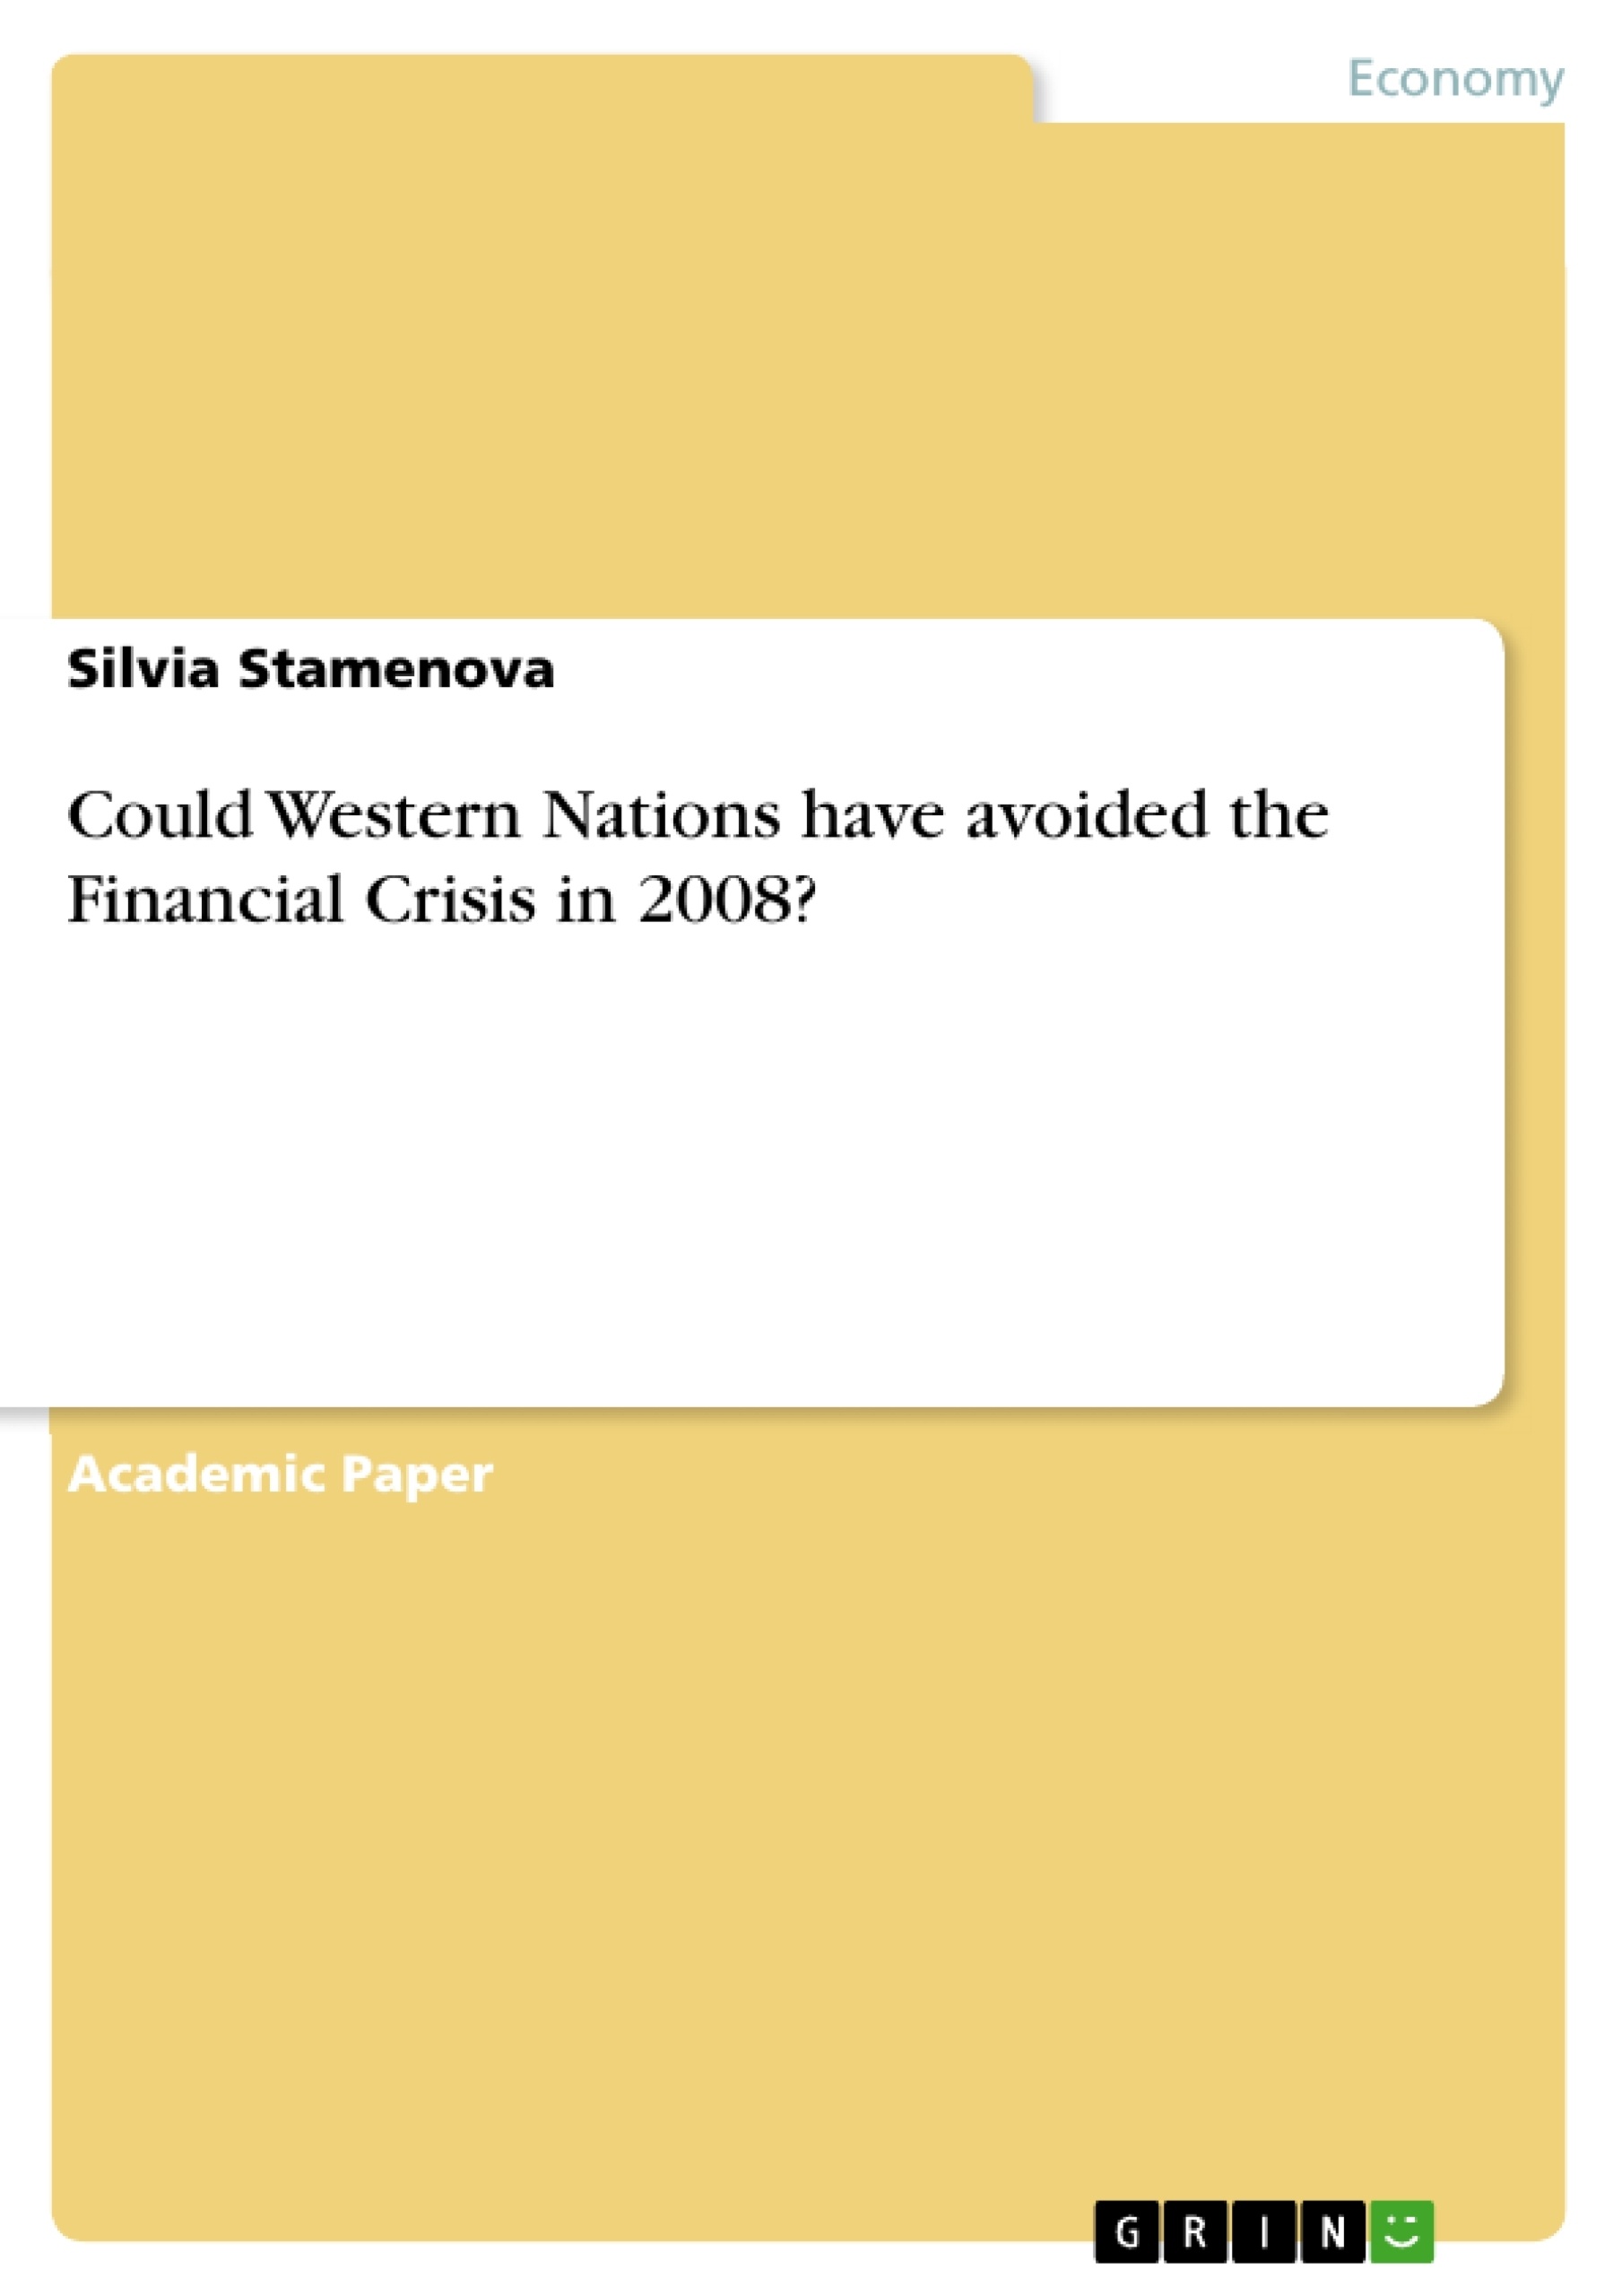 Título: Could Western Nations have avoided the Financial Crisis in 2008?